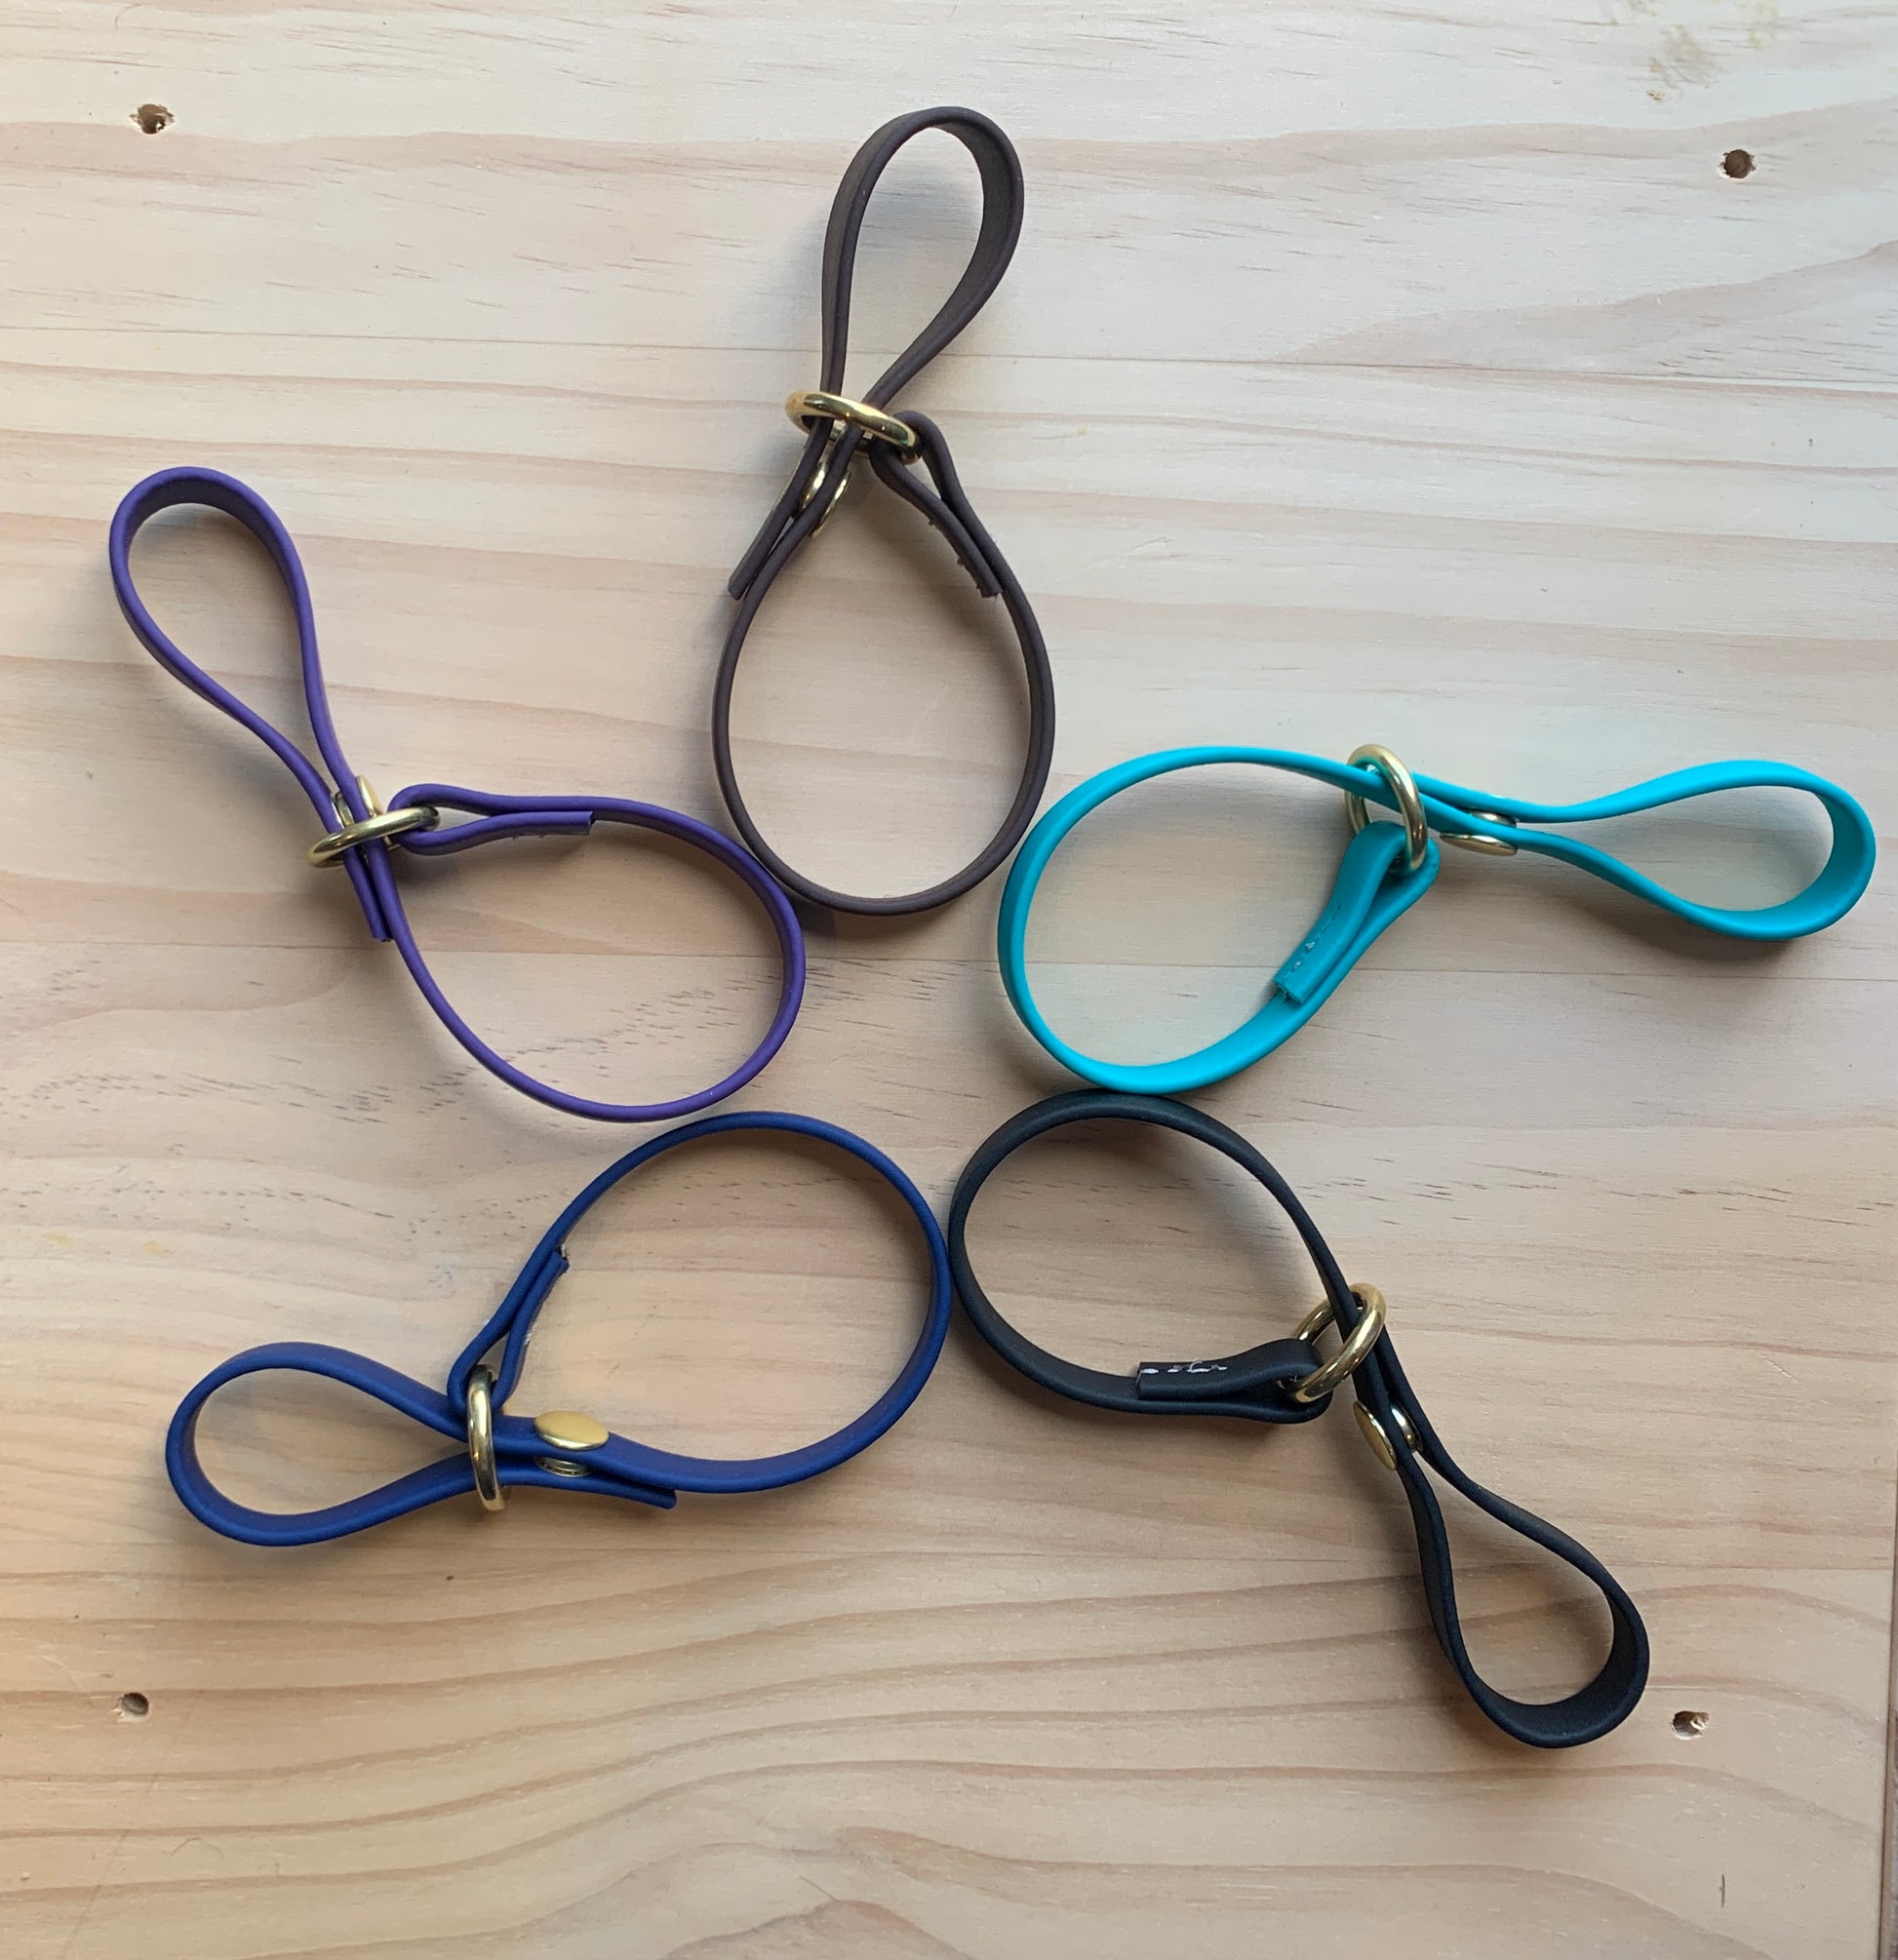 Four different colored Trailblazing Tails: The Long Line Holder leashes, featuring a long line holder and snap closure, beautifully displayed on a wooden table.